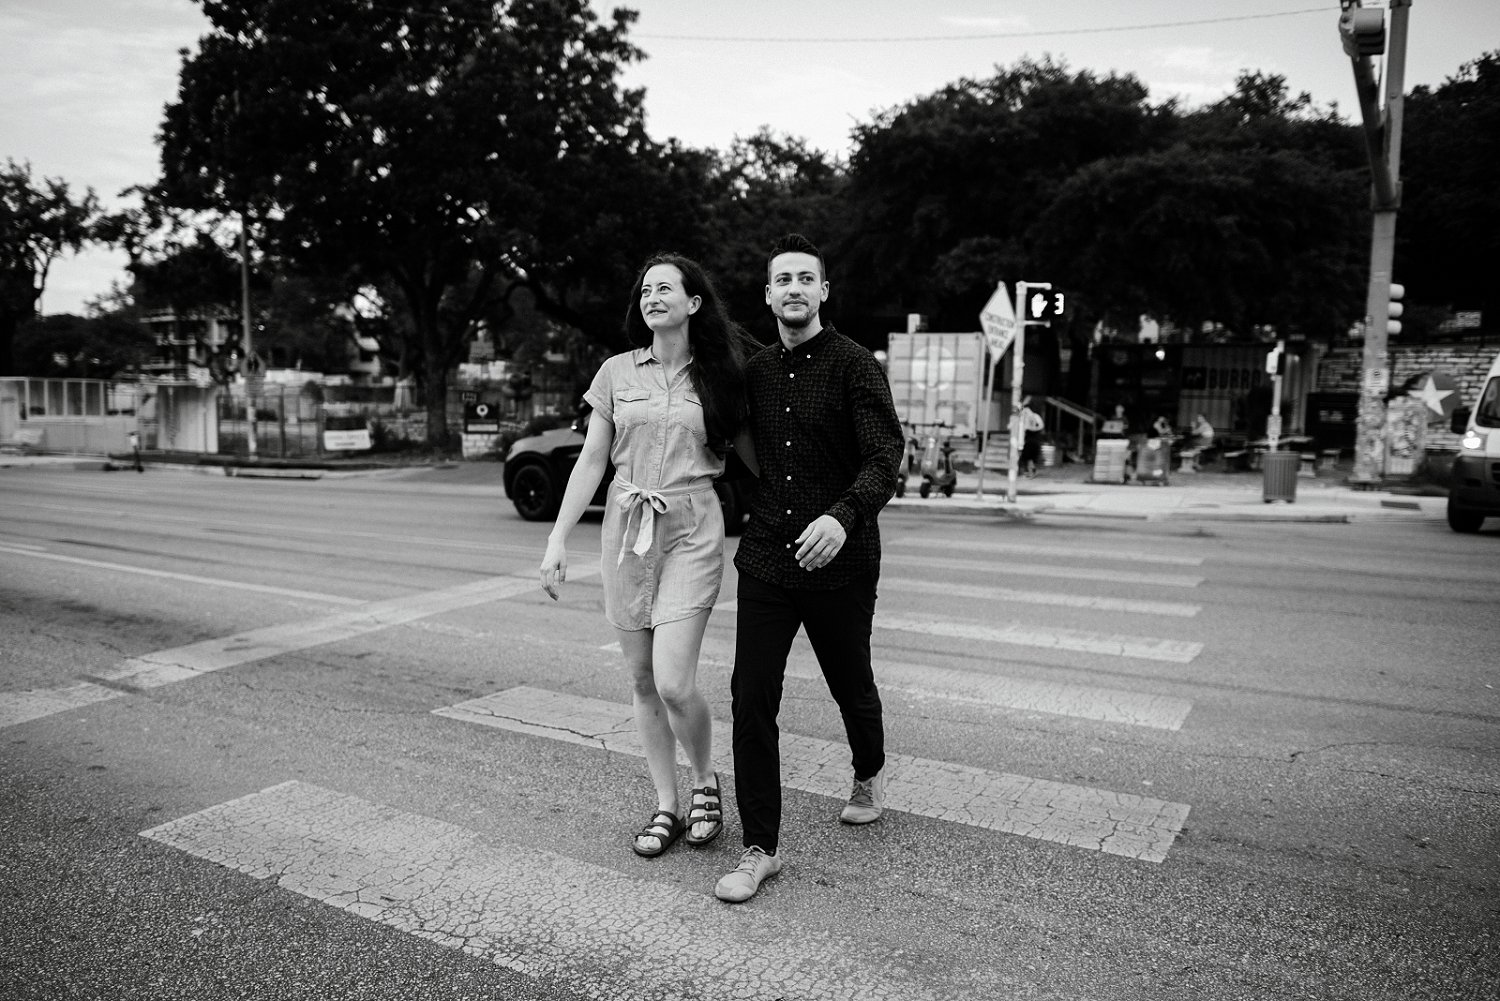 south congress engagement session date night